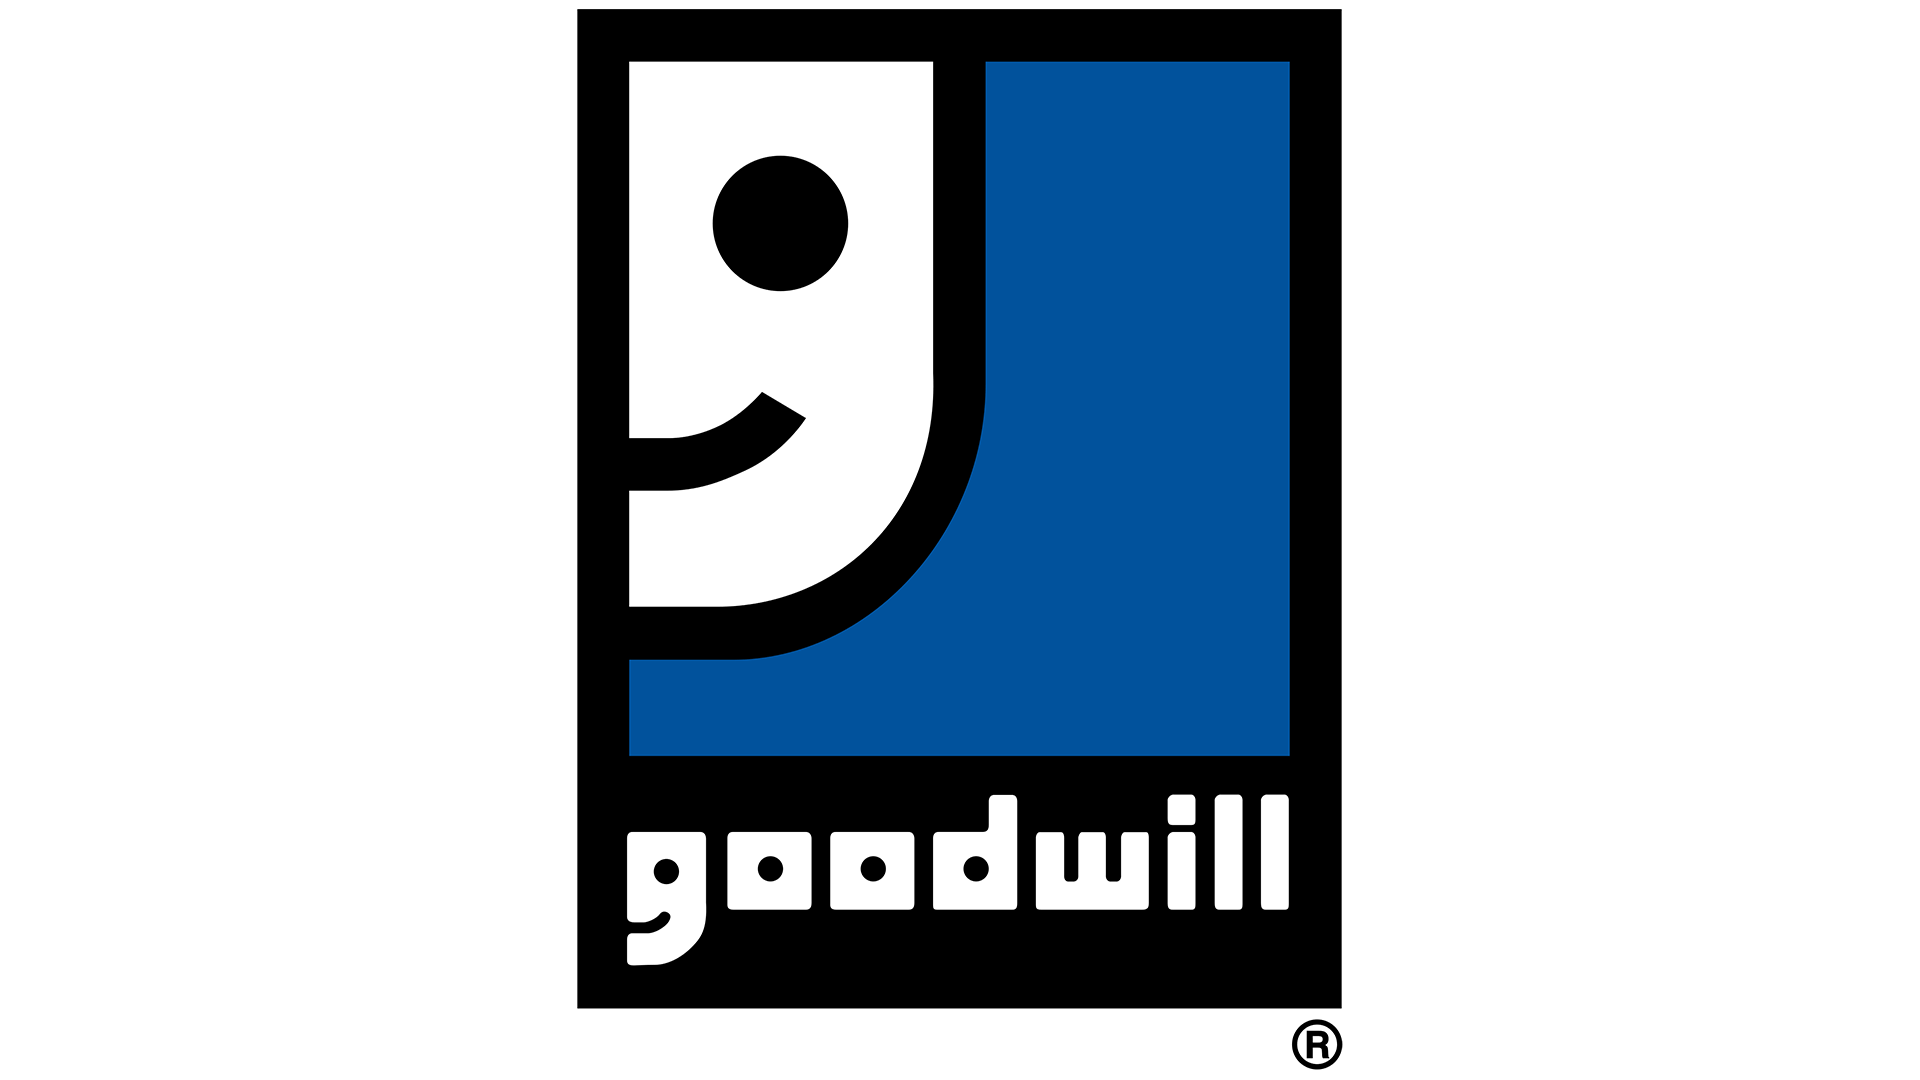 Goodwill Logo - Goodwill logo, symbol, meaning, History and Evolution